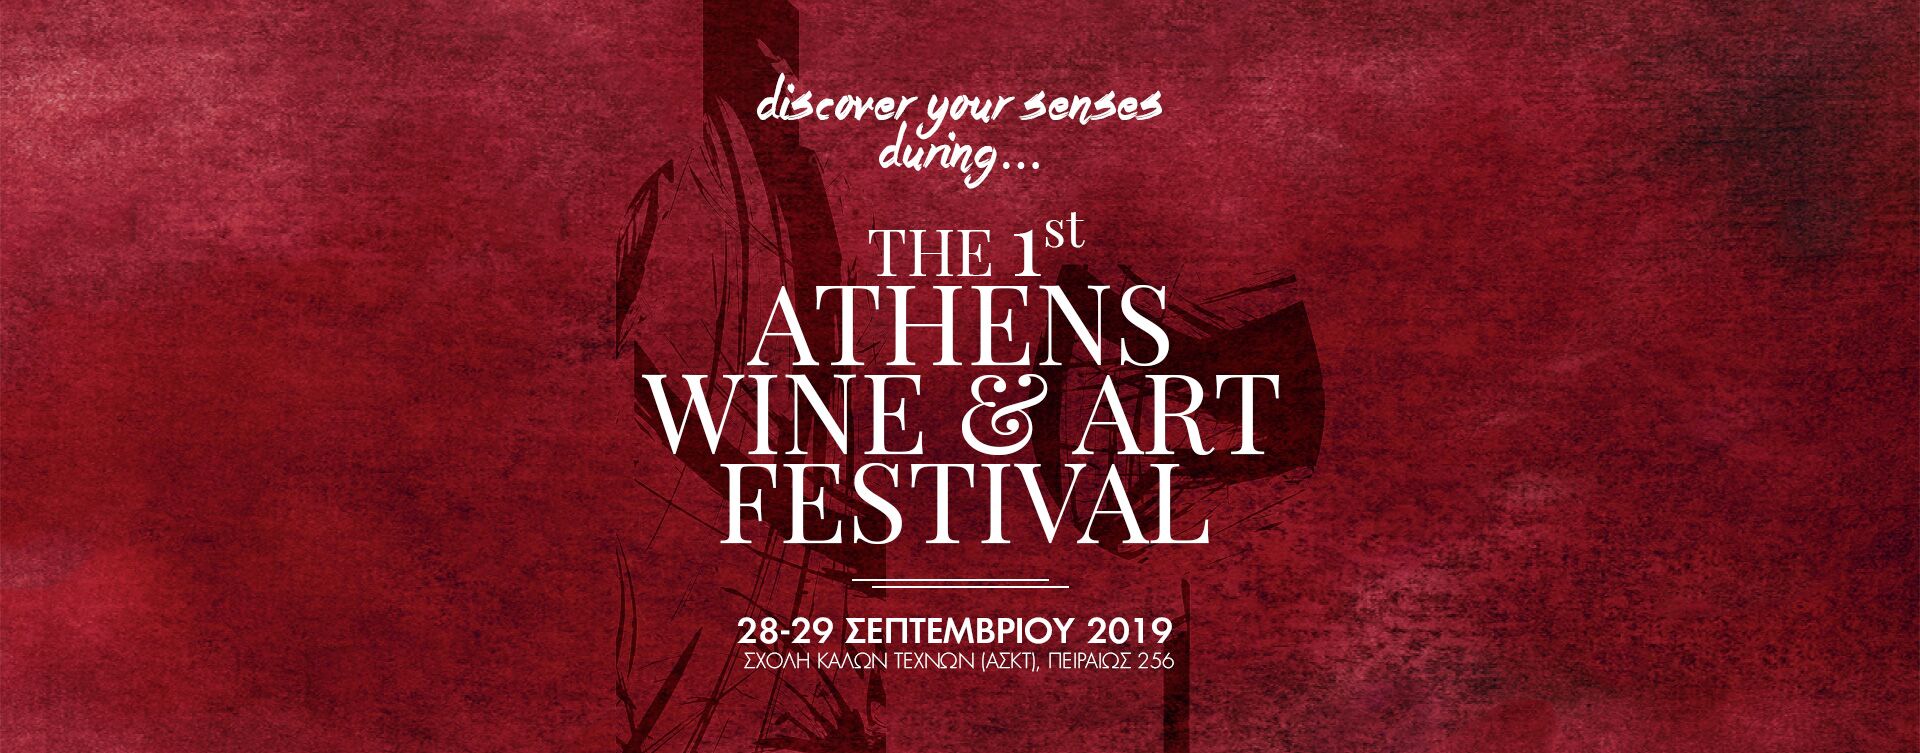 wine and art festival